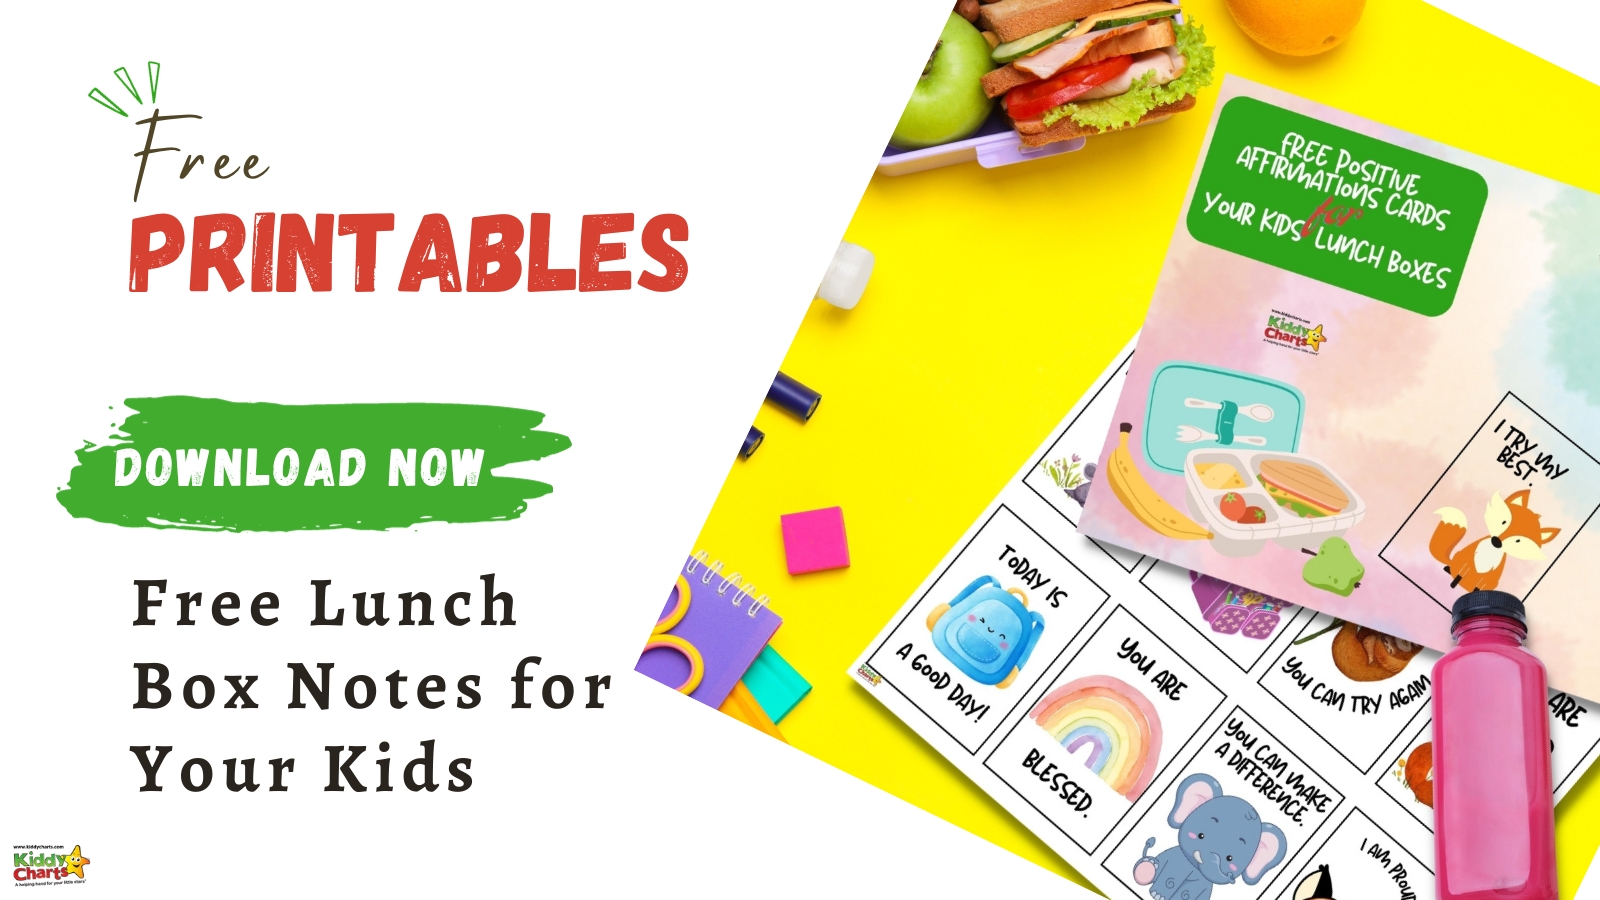 Boost your child’s day with free printable positive affirmation lunch box notes